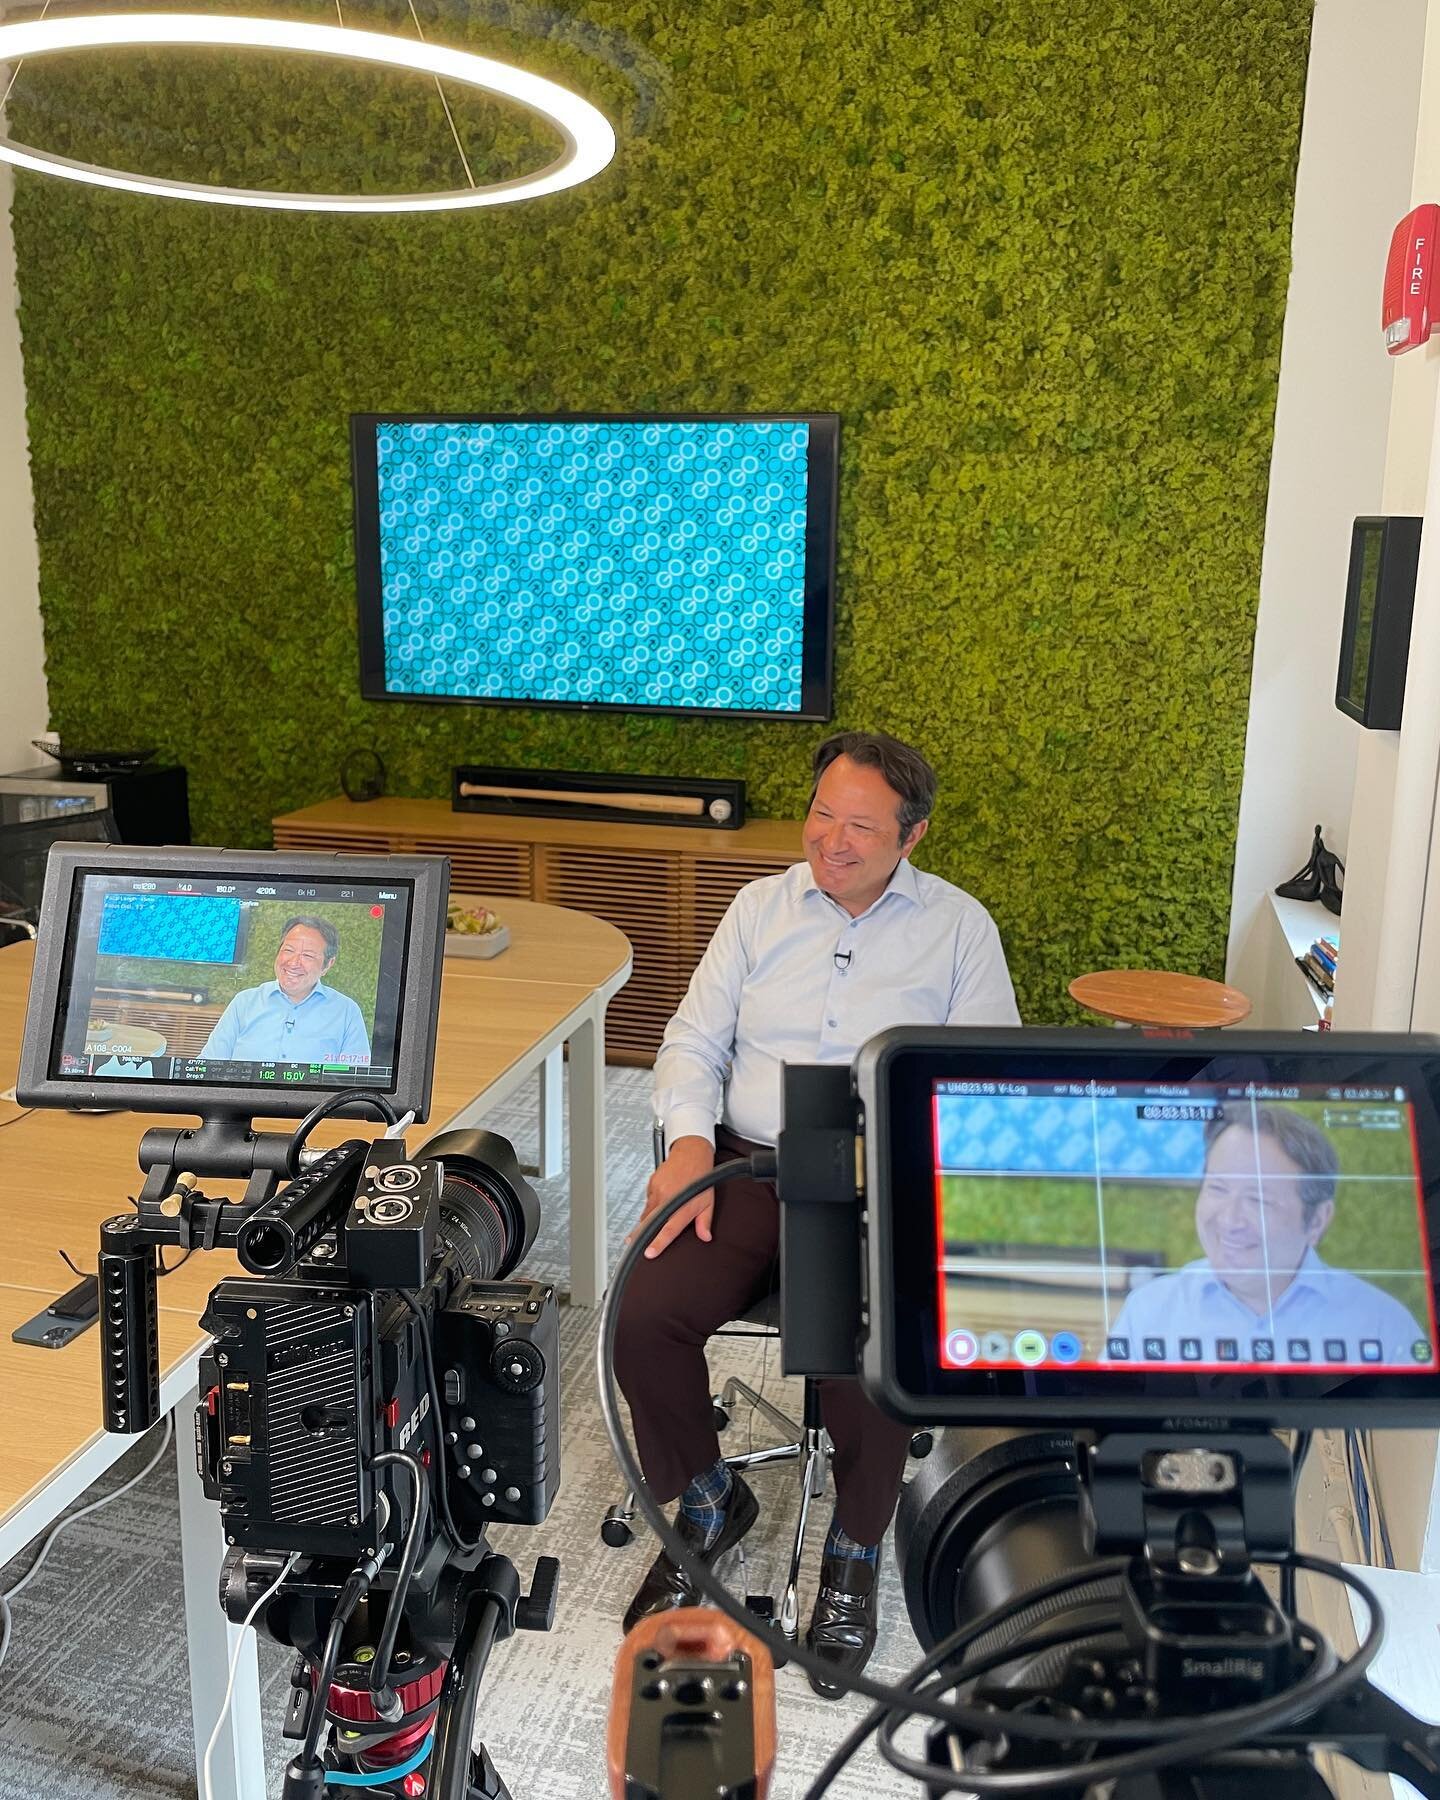 Turning our corporate office into a film studio today! Shooting interviews with our Chief Executive Officer, Stan Vashovsky; Vice President of Mobile Health, Carrie Hodge; and Chief Medical Officer, Dr. Mark Merlin. Stay tuned! The corporate document